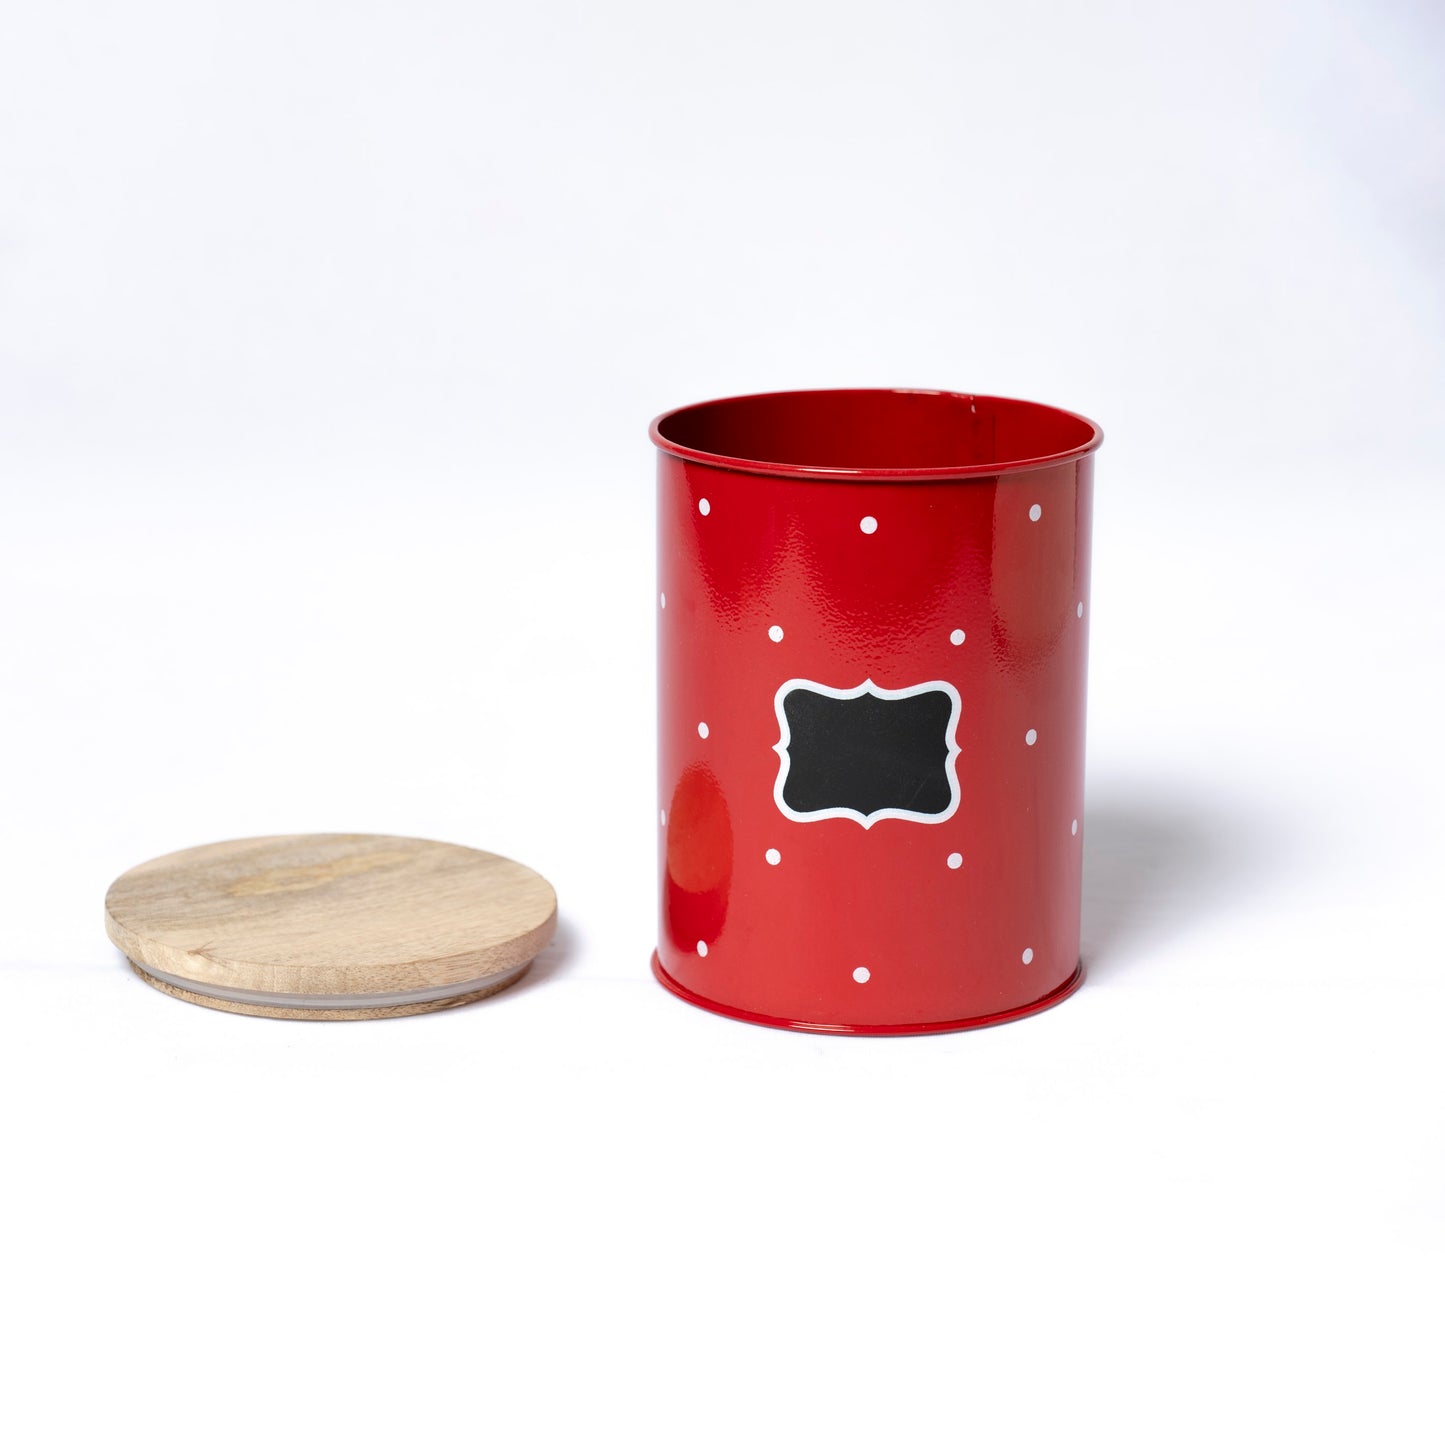 Polka Dot Design Steel Storage Container with Wooden Lid (Red) - SCST0006 - View 3